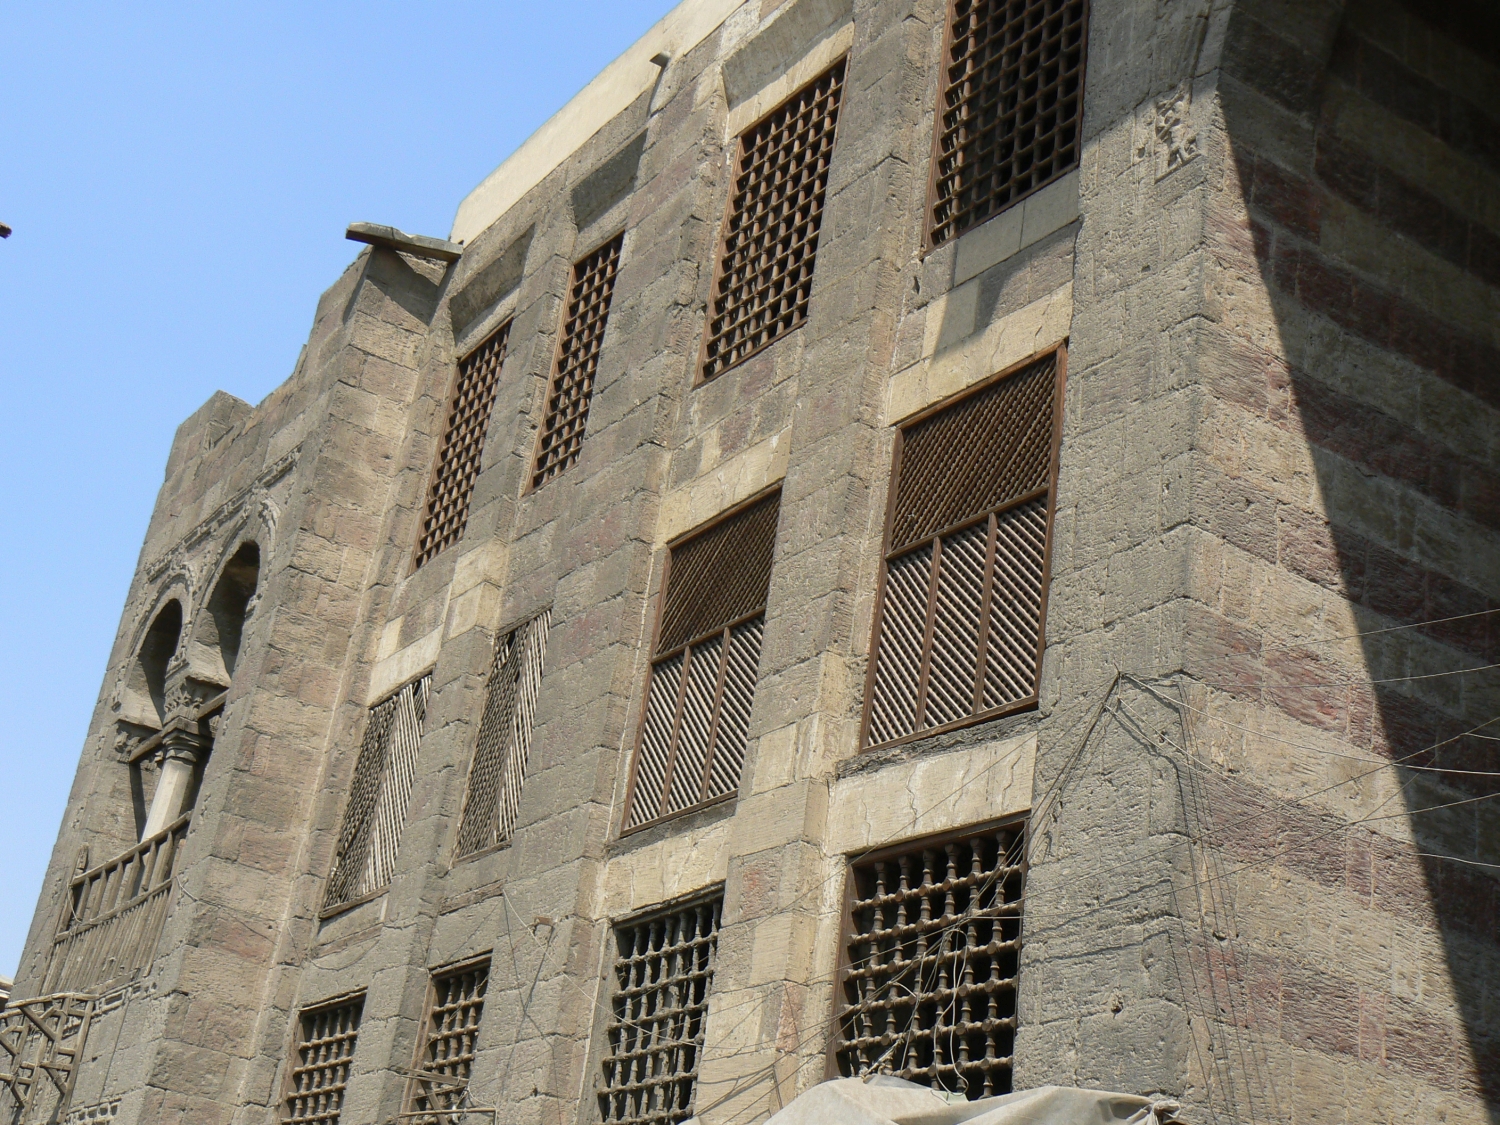 Grille and lattice windows on the front façade